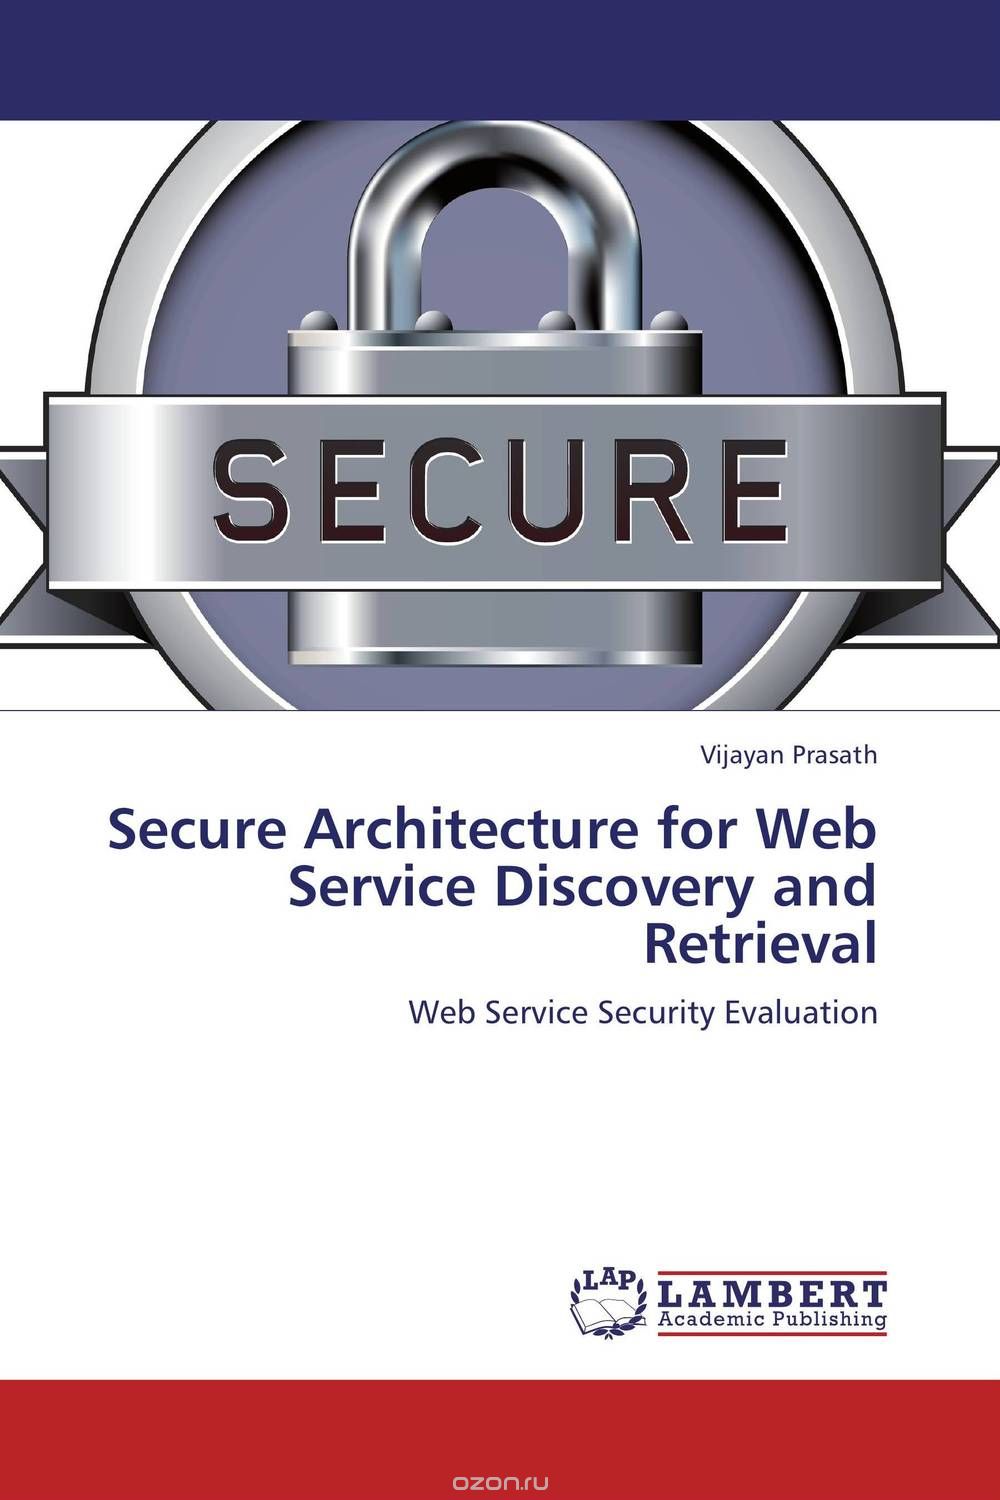 Скачать книгу "Secure Architecture for Web Service Discovery and Retrieval"